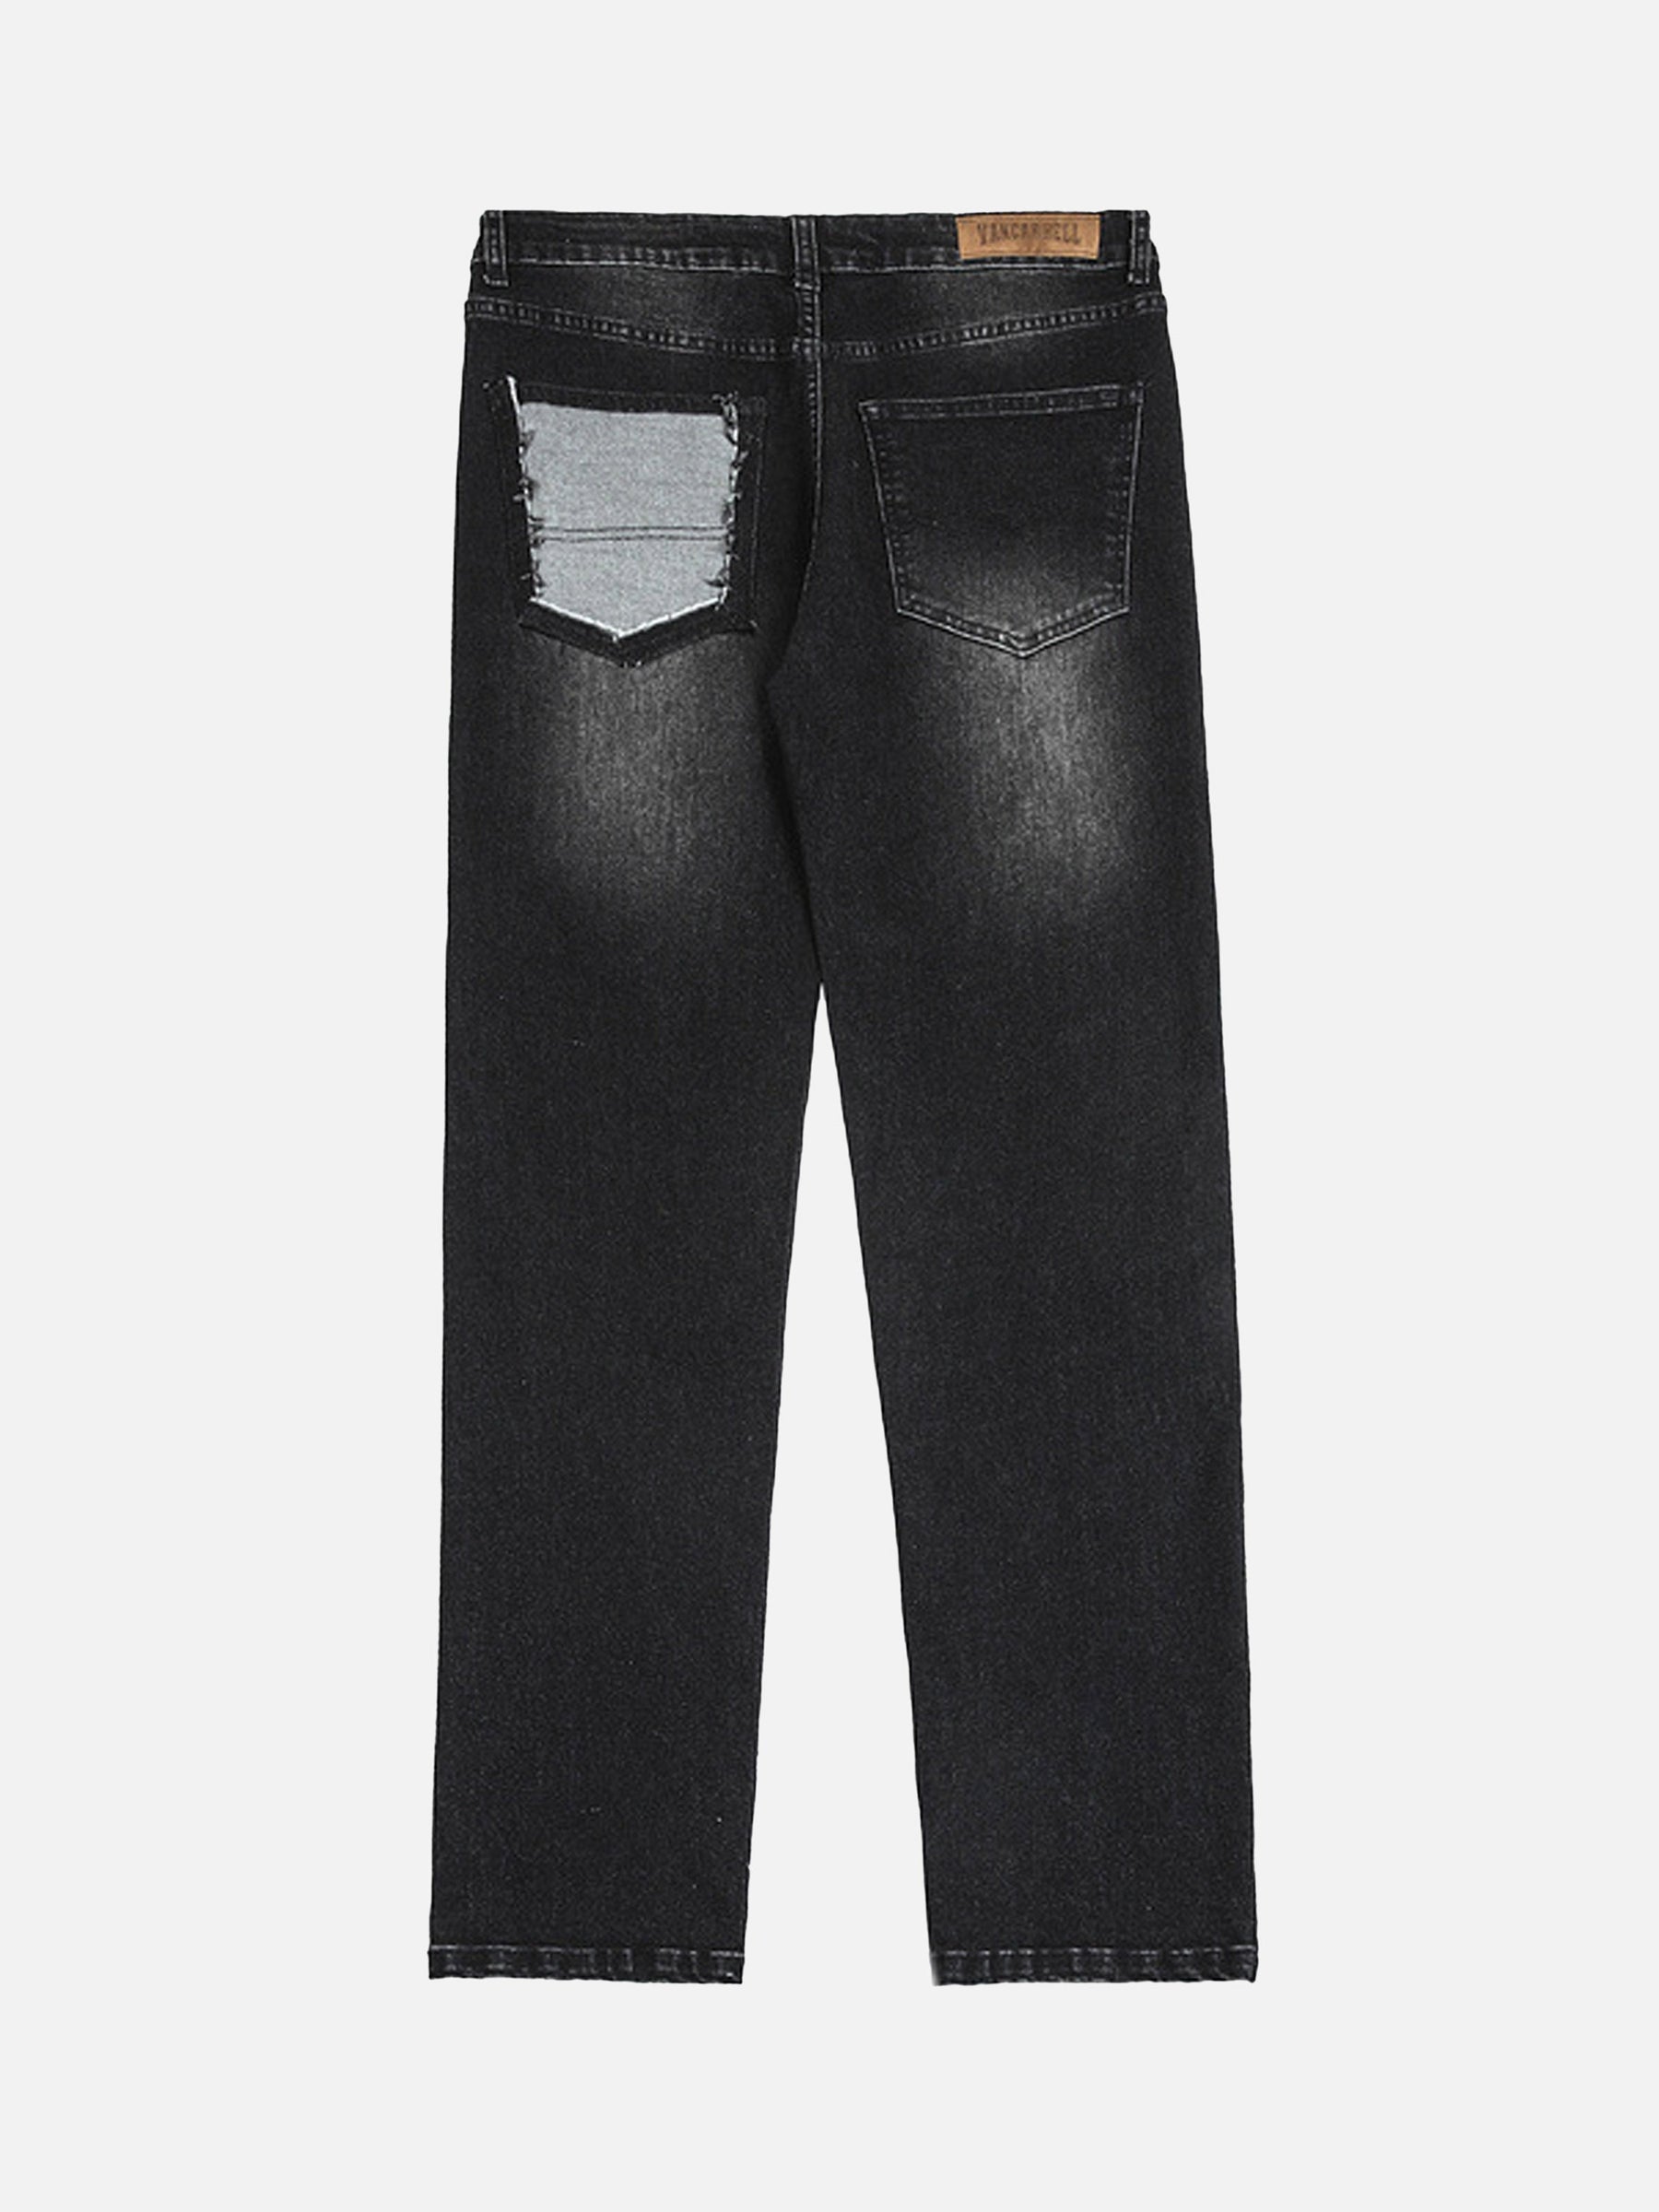 LUXENFY™ - High Street Washed Patch Embroidery Straight Casual Jeans -1401 luxenfy.com